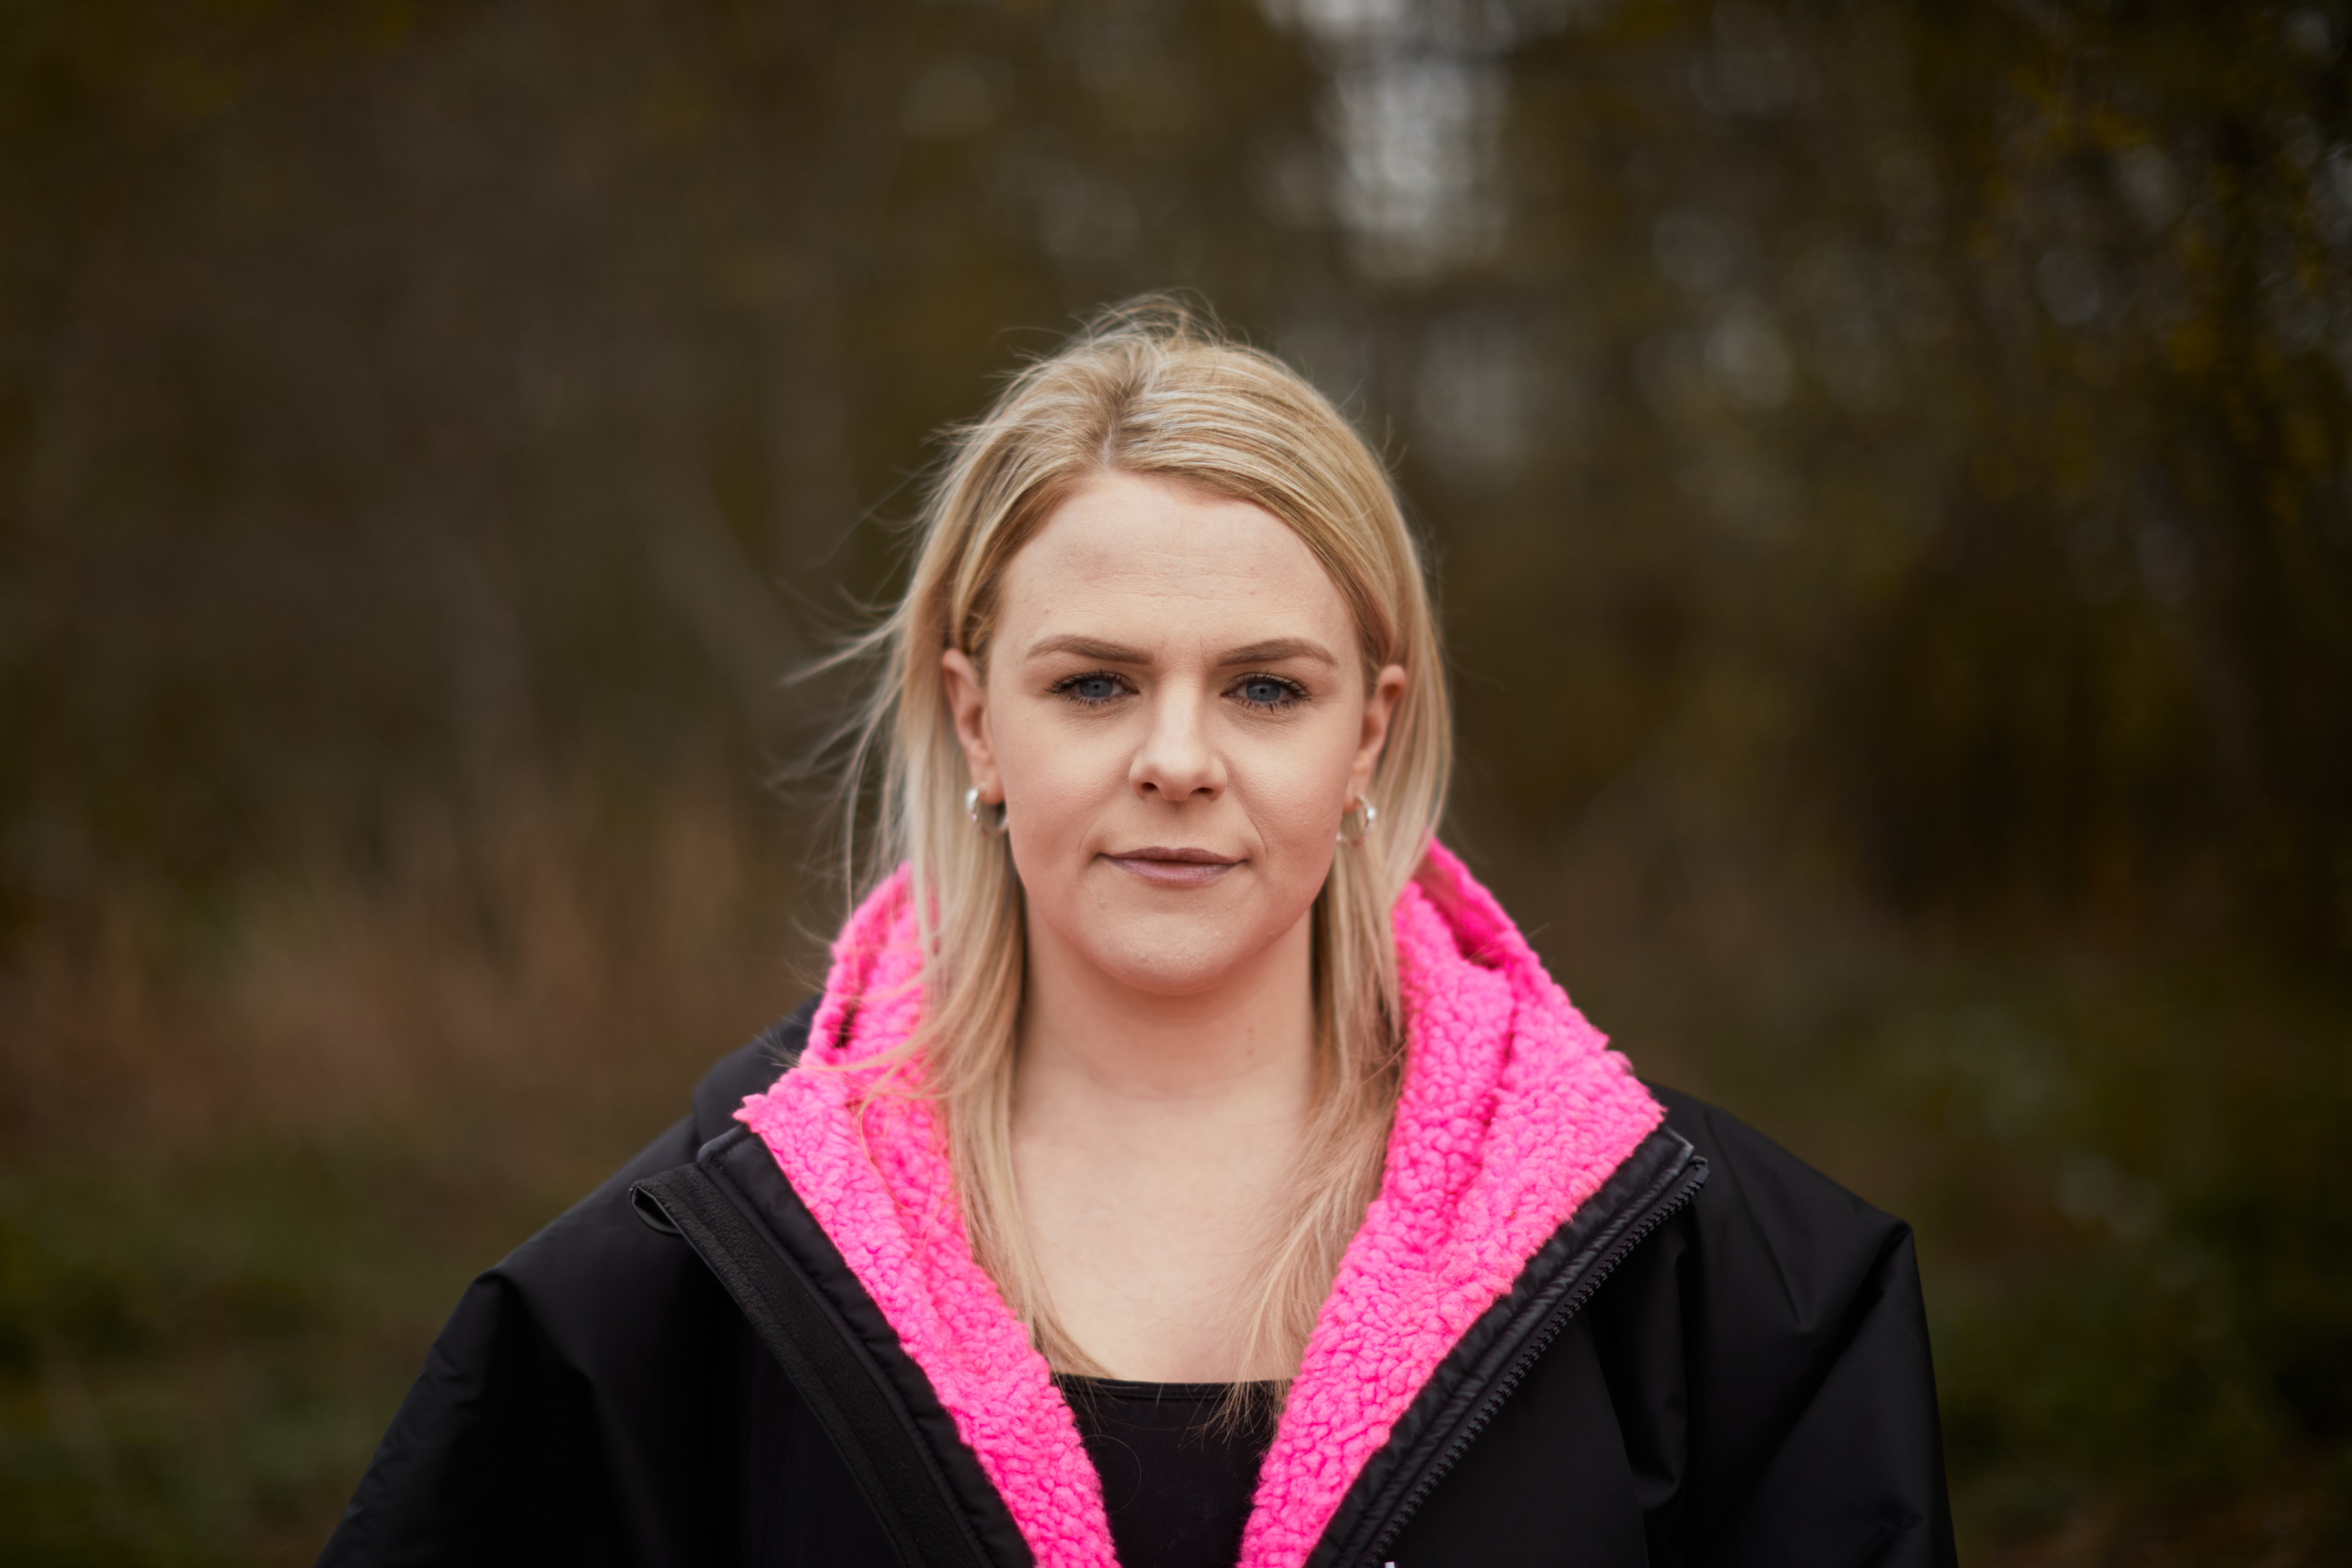 Danielle McGinlay said cold water therapy had reduced her stress levels and stopped panic attacks (Graeme MacDonald/Loch Lomond & The Trossachs National Park)